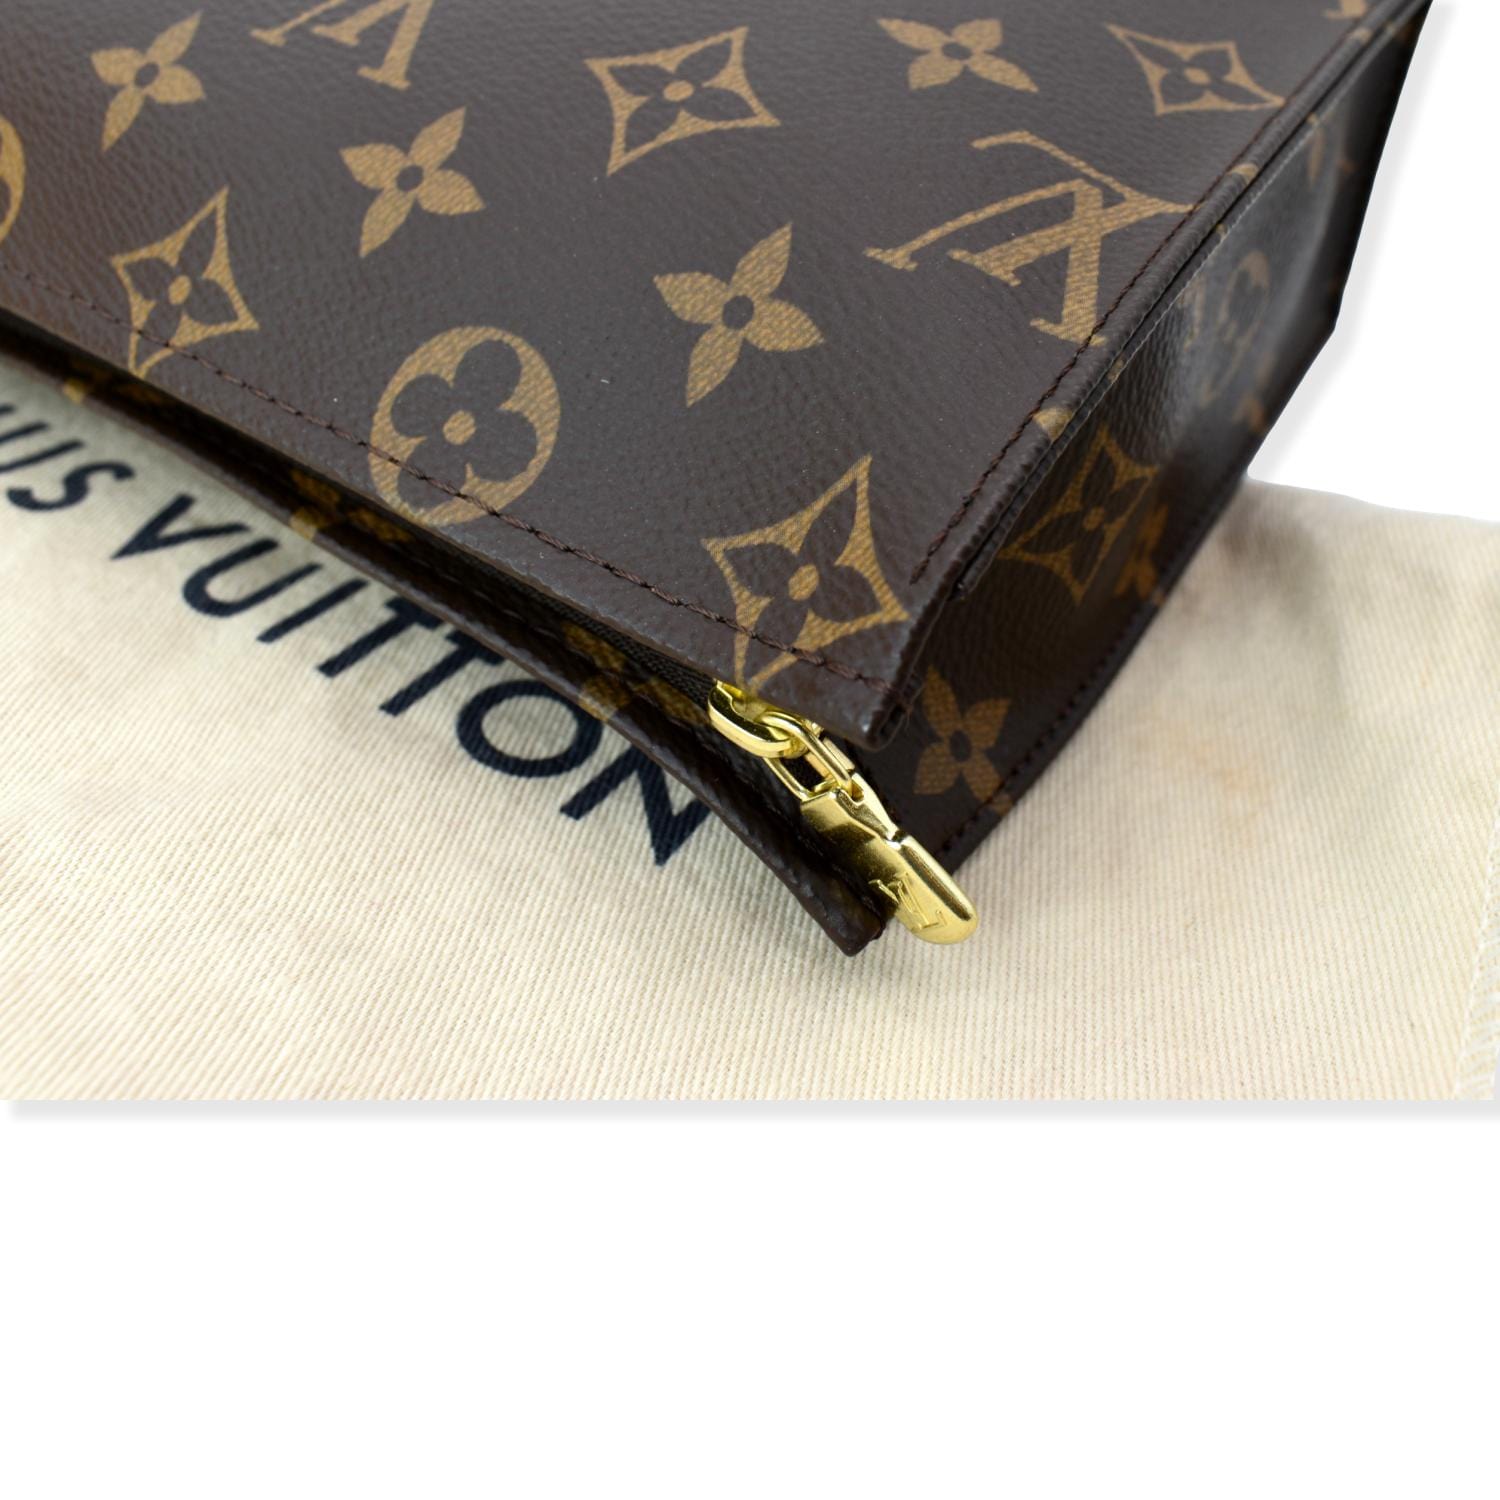 LOUIS VUITTON MONOGRAM Toiletry 19 Cosmetic Case, Make-up Pouch, BOX